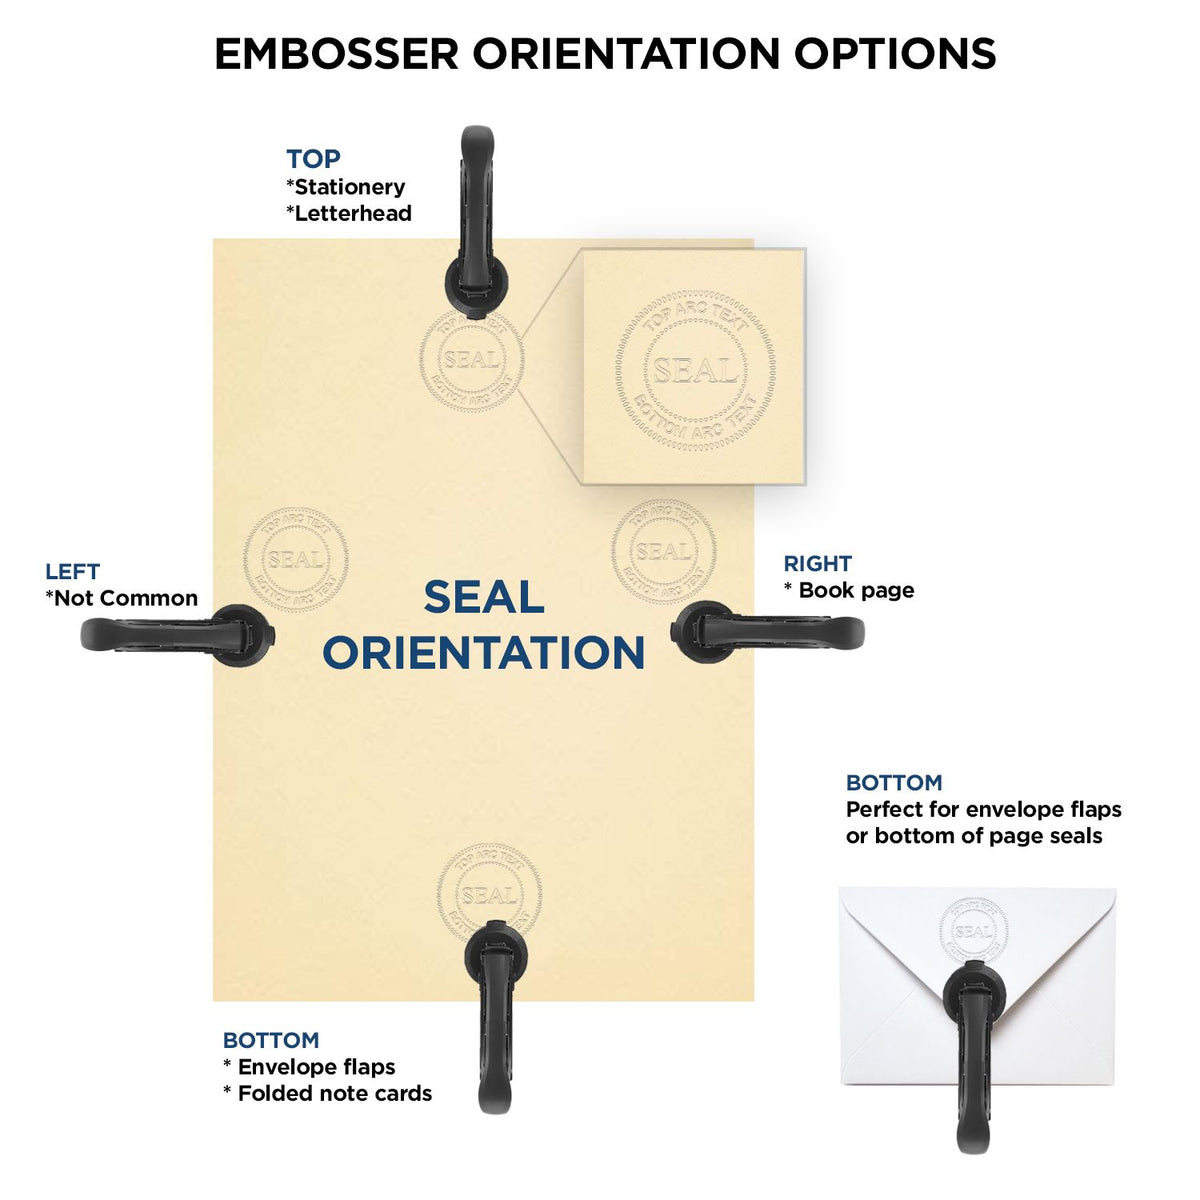 An infographic for the Handheld Mississippi Architect Seal Embosser showing embosser orientation, this is showing examples of a top, bottom, right and left insert.